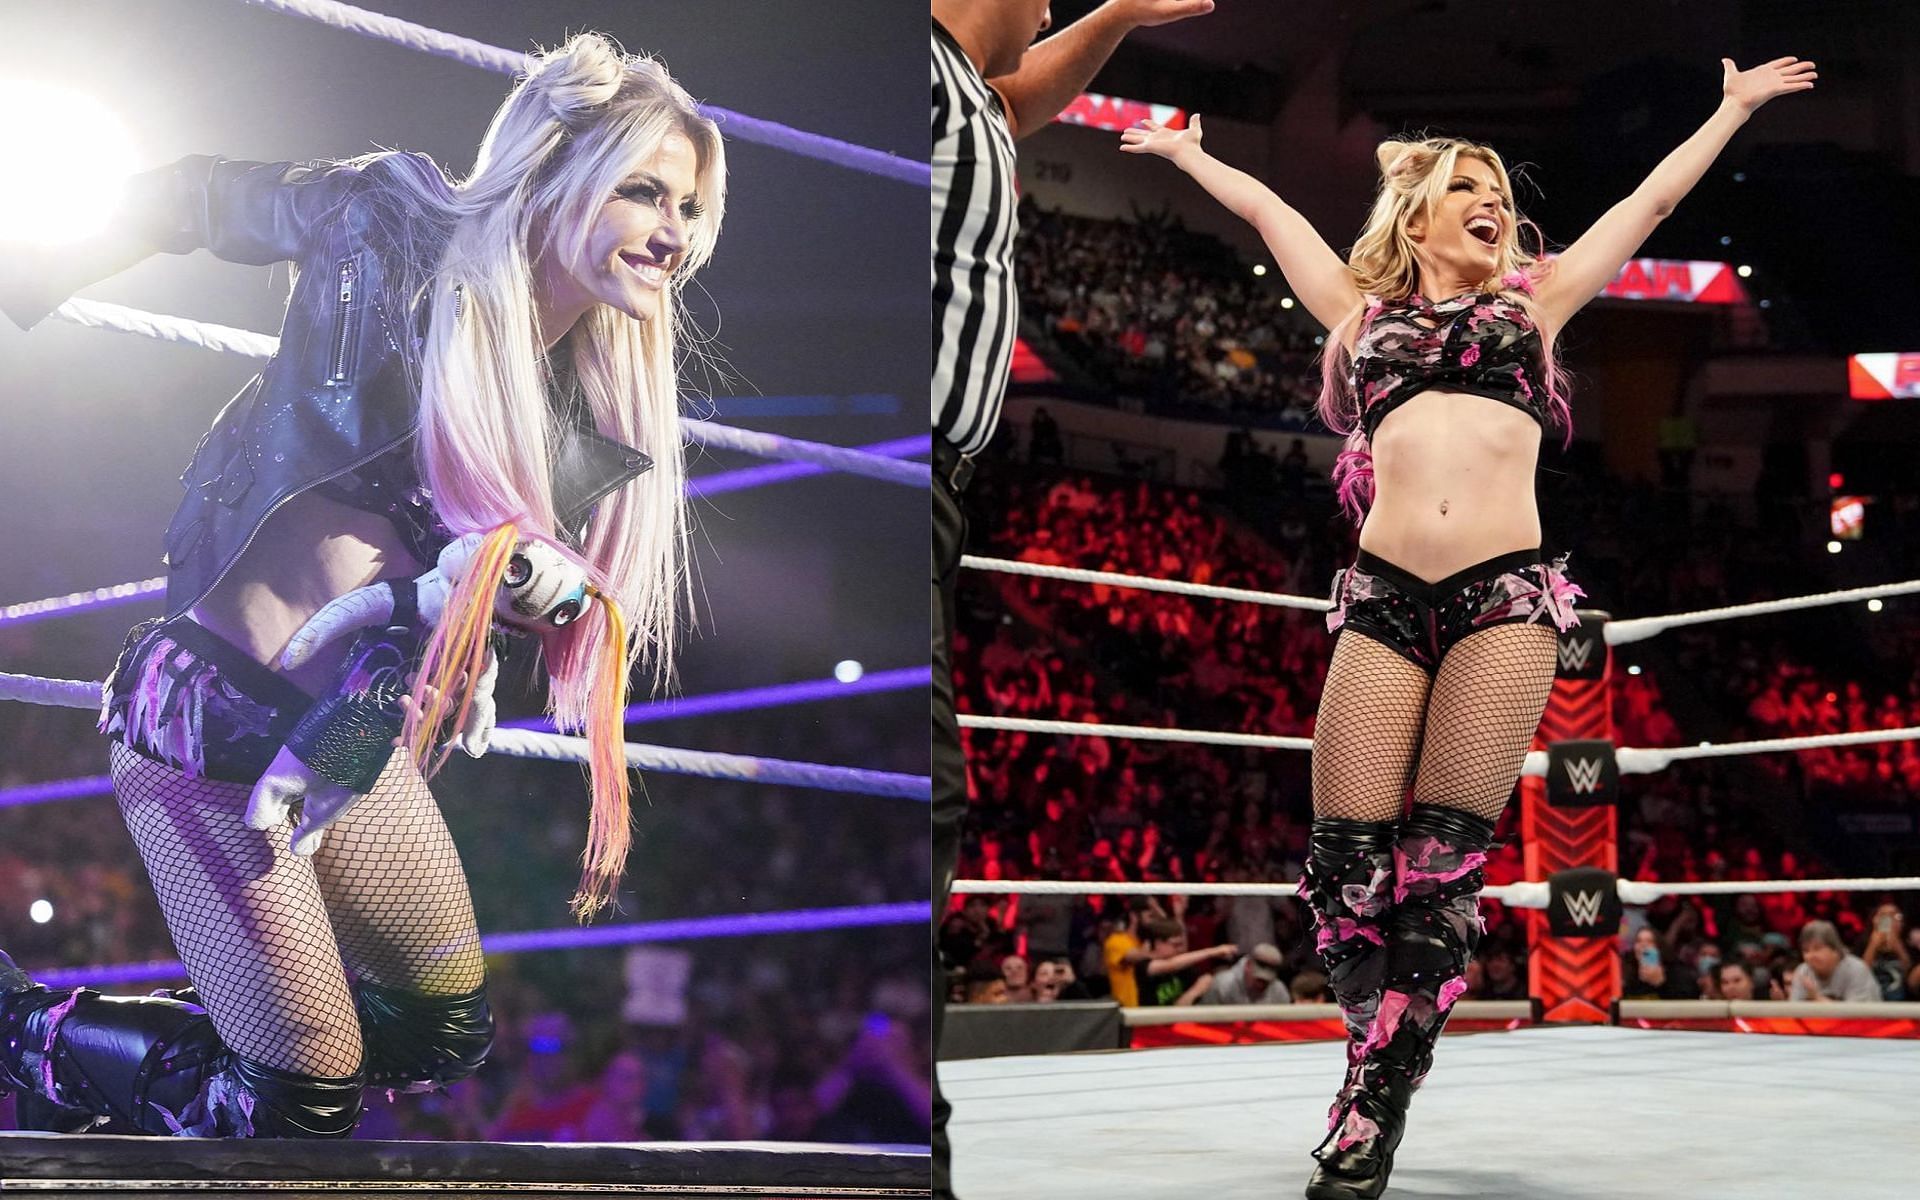 Alexa Bliss featured a new gimmick and entrance music since her return last month!